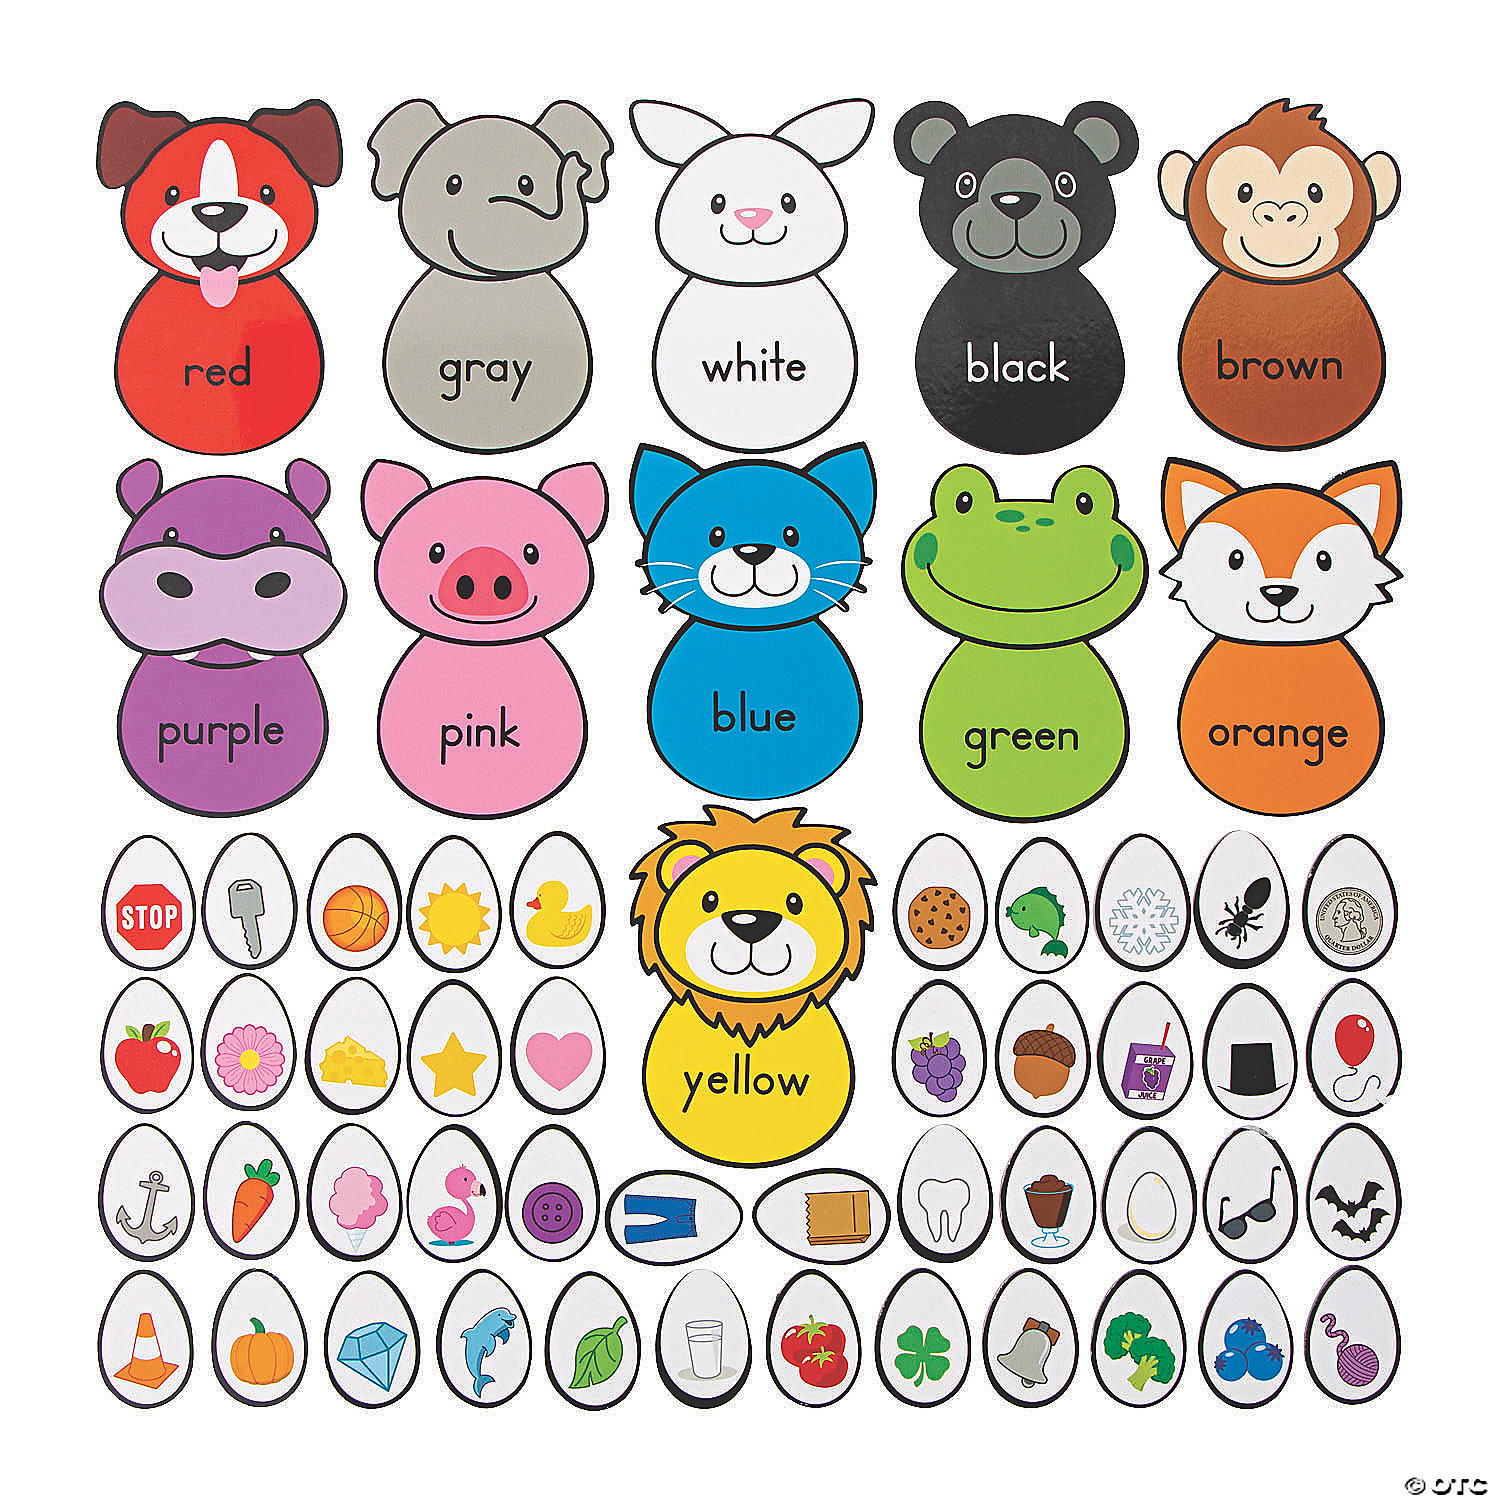 Build an Animal Color Match Game | Oriental Trading